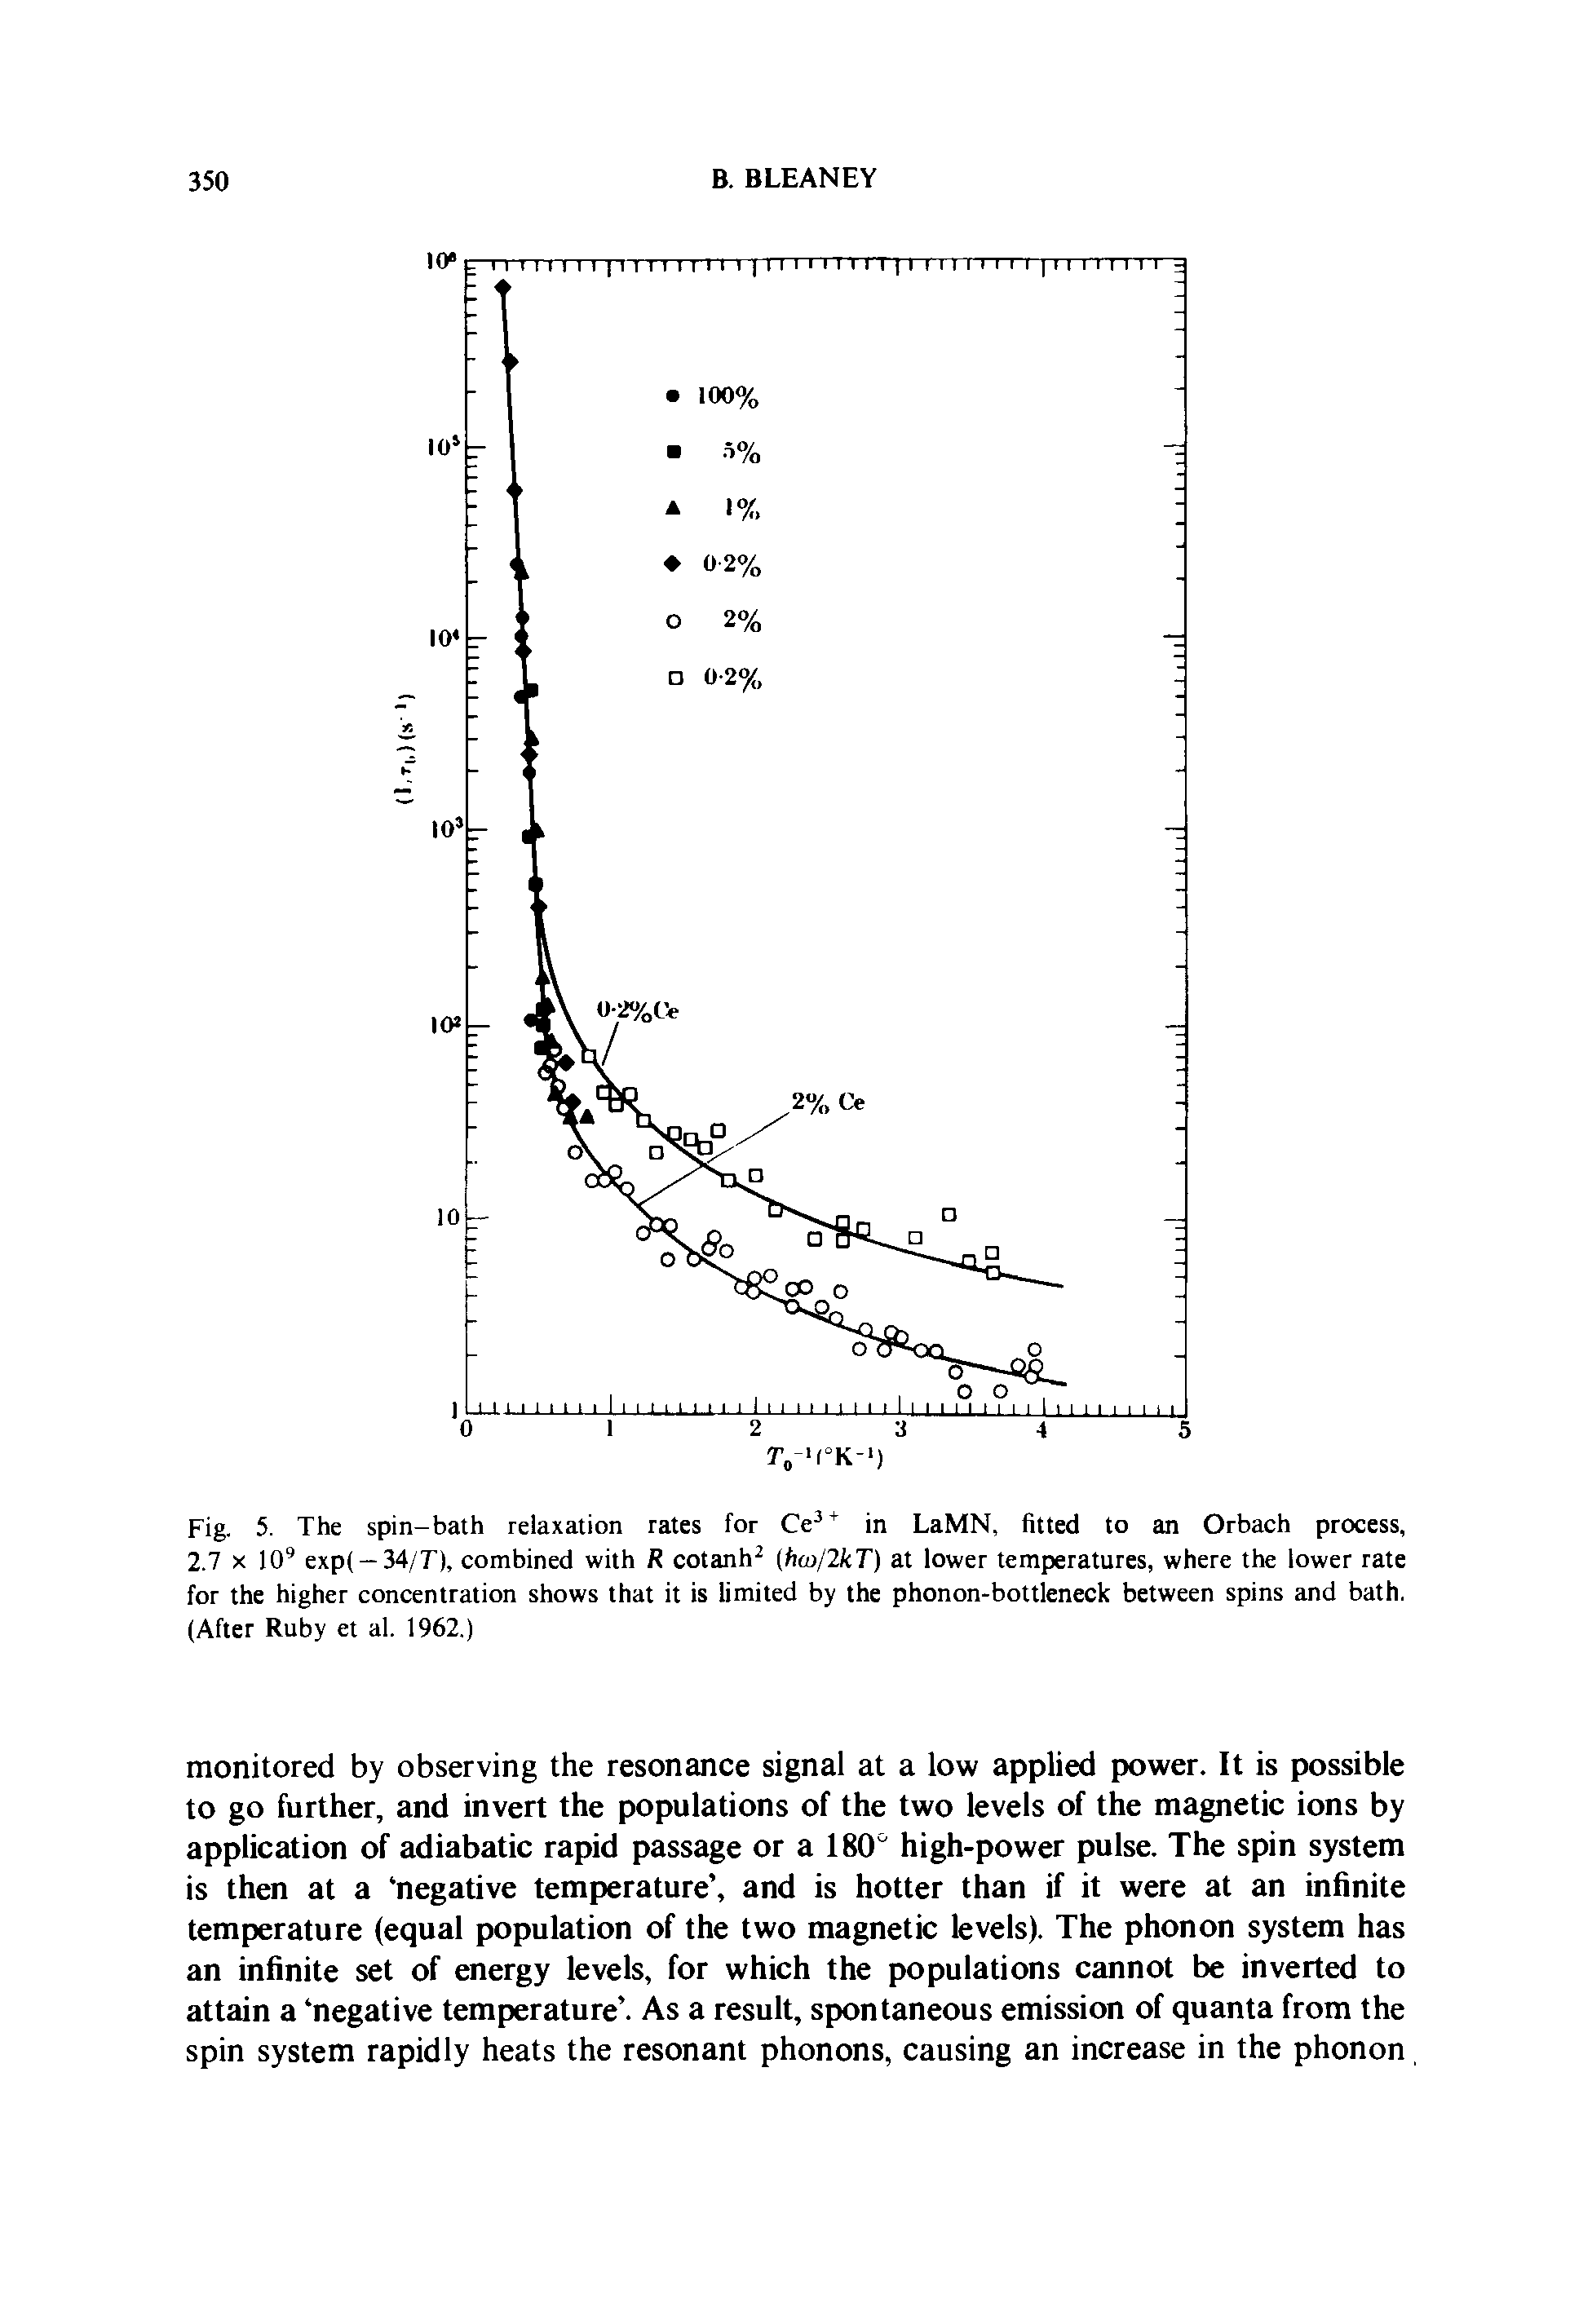 Fig. 5. The spin-bath relaxation rates for Ce in LaMN, fitted to an Orbach process, 2.7 X 10 exp( —34/D, combined with R cotanh (ho)/2kT) at lower temperatures, where the lower rate for the higher concentration shows that it is limited by the phonon-bottleneck between spins and bath. (After Ruby et al. 1962.)...